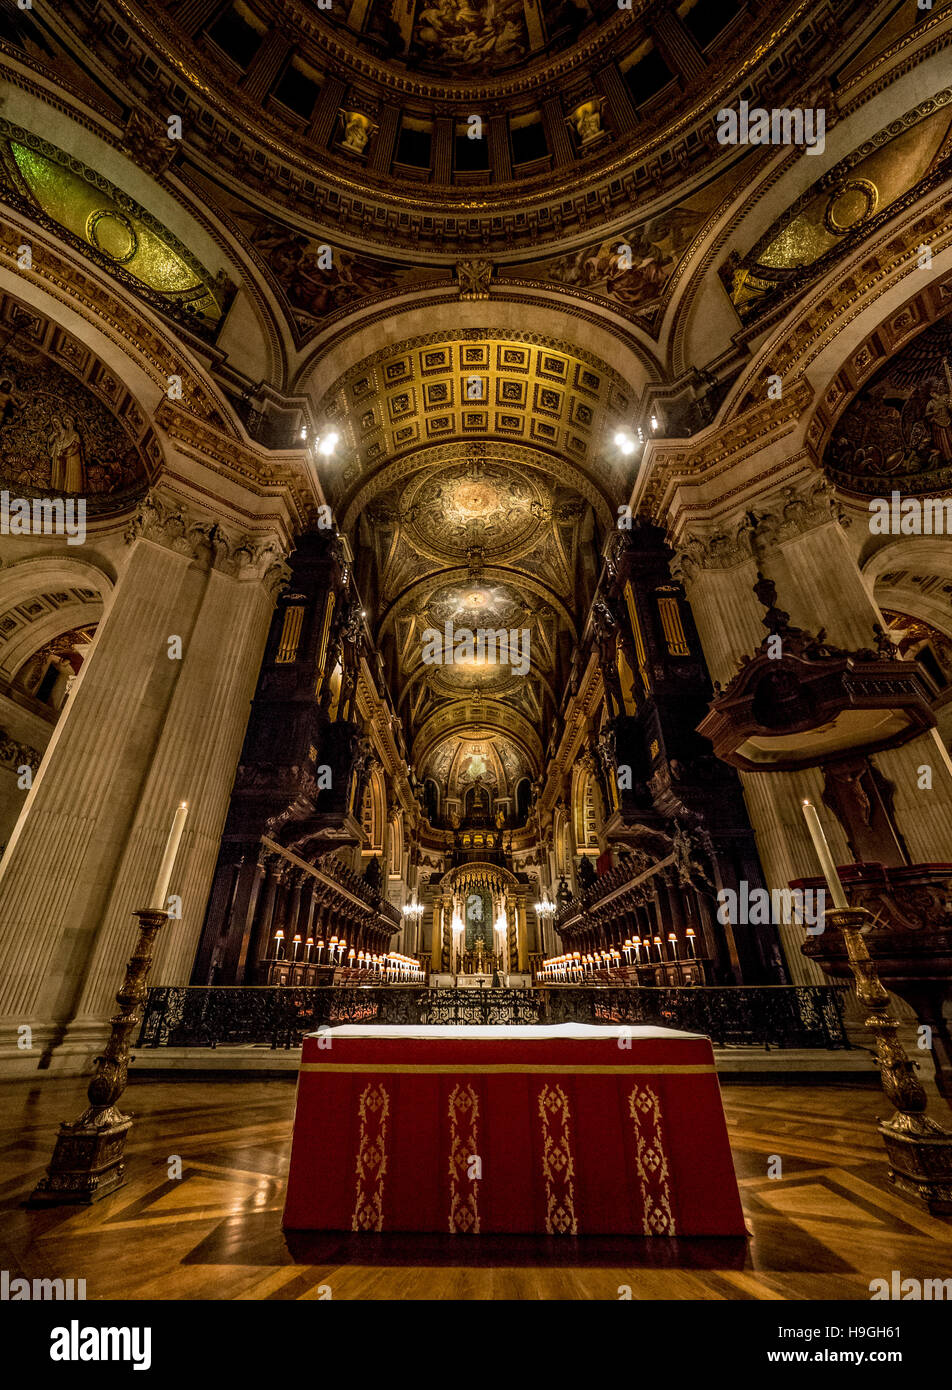 Interior of St Paul's Cathedral, London, UK. Stock Photo